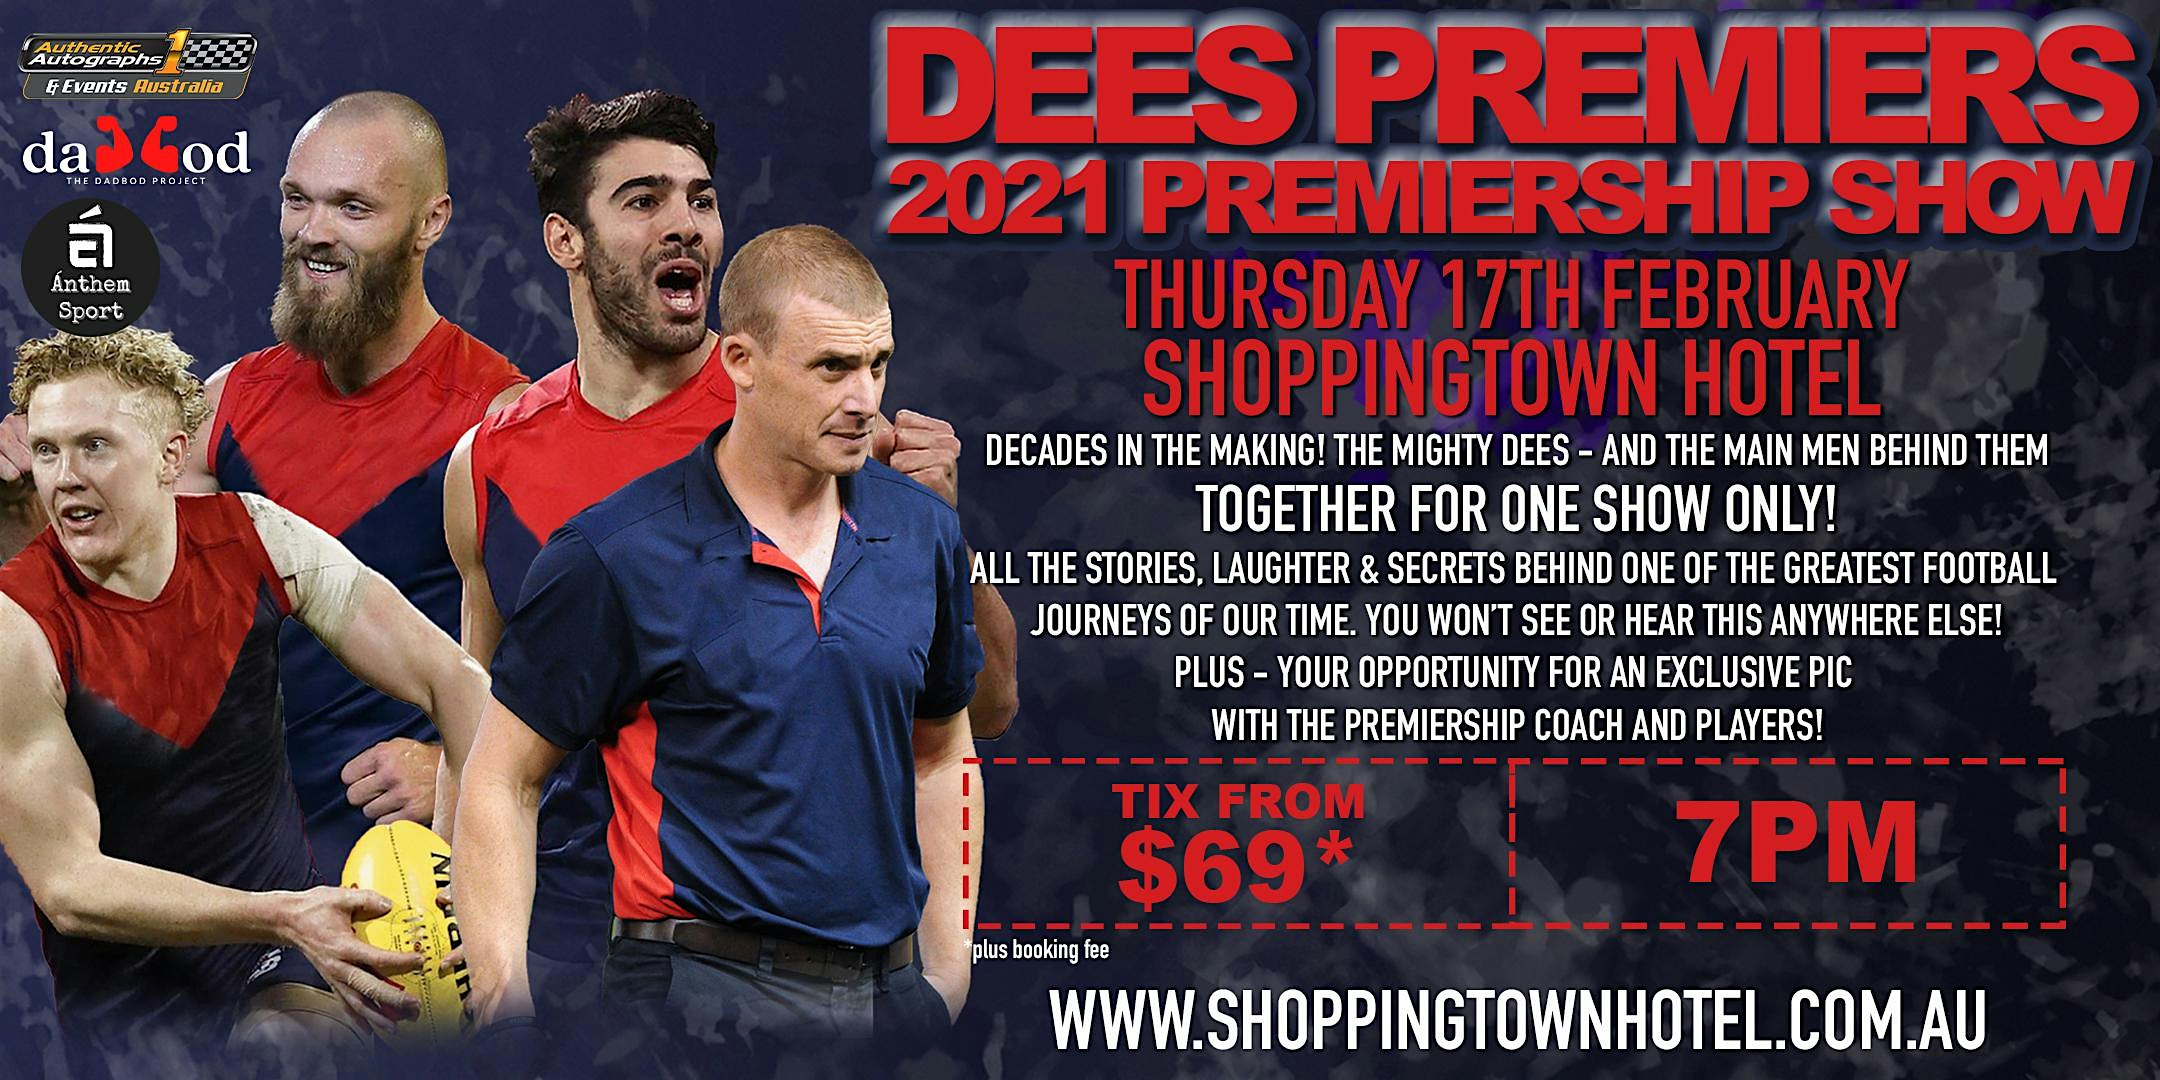 Year of the Dees! The 2021 Premiership Show at Shoppingtown Hotel!